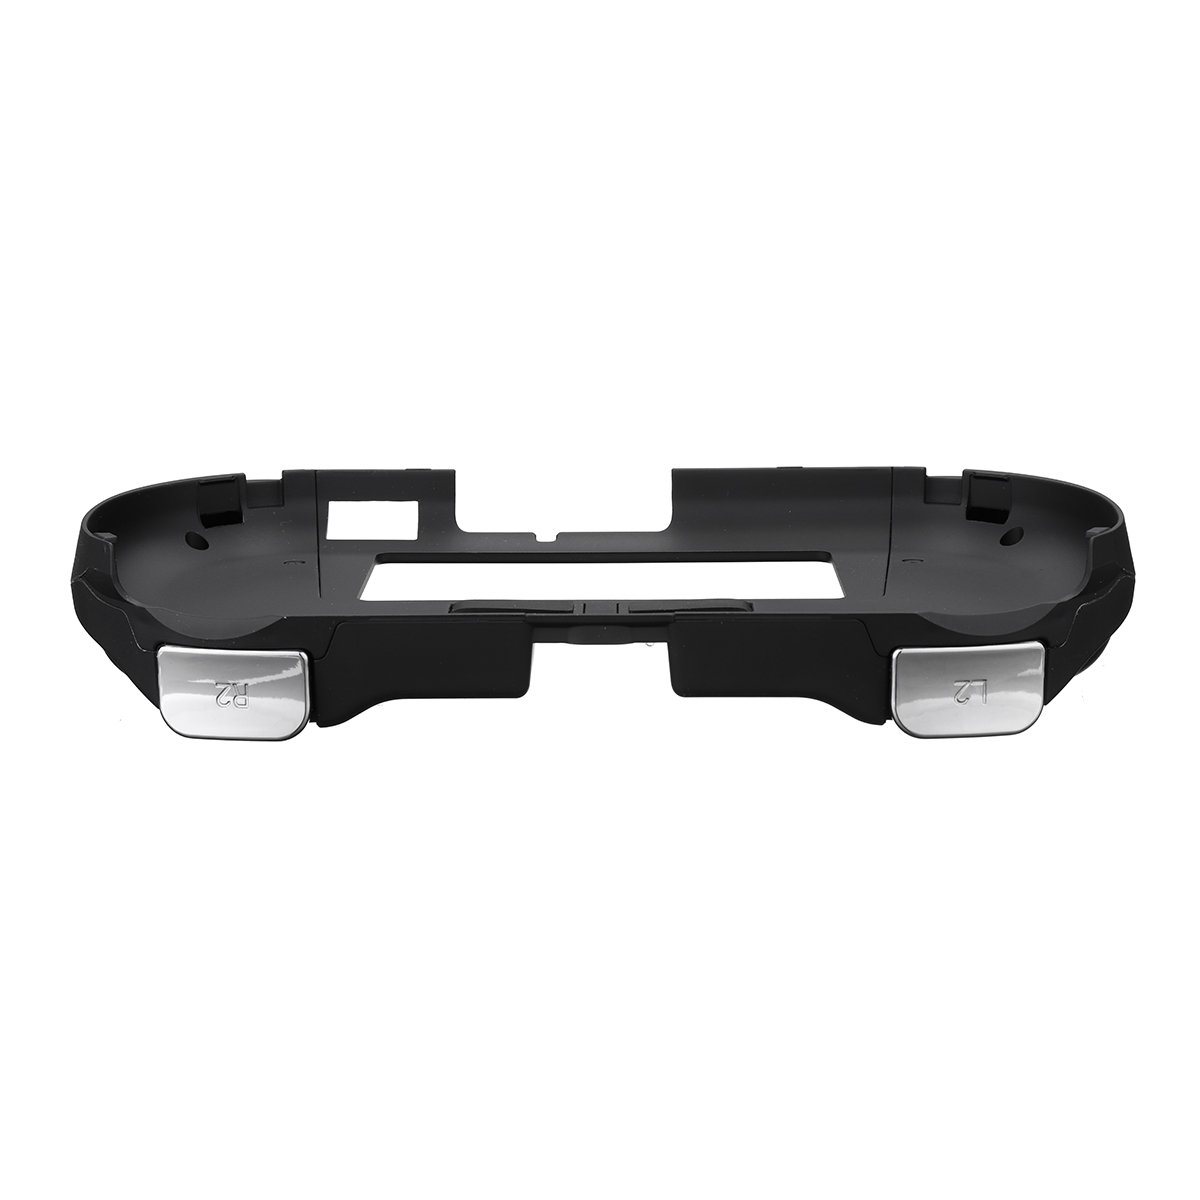 L2 R2 Trigger Grips Handle Shell Protective Case for Sony PlayStation PS Vita 2000 Game Console 4